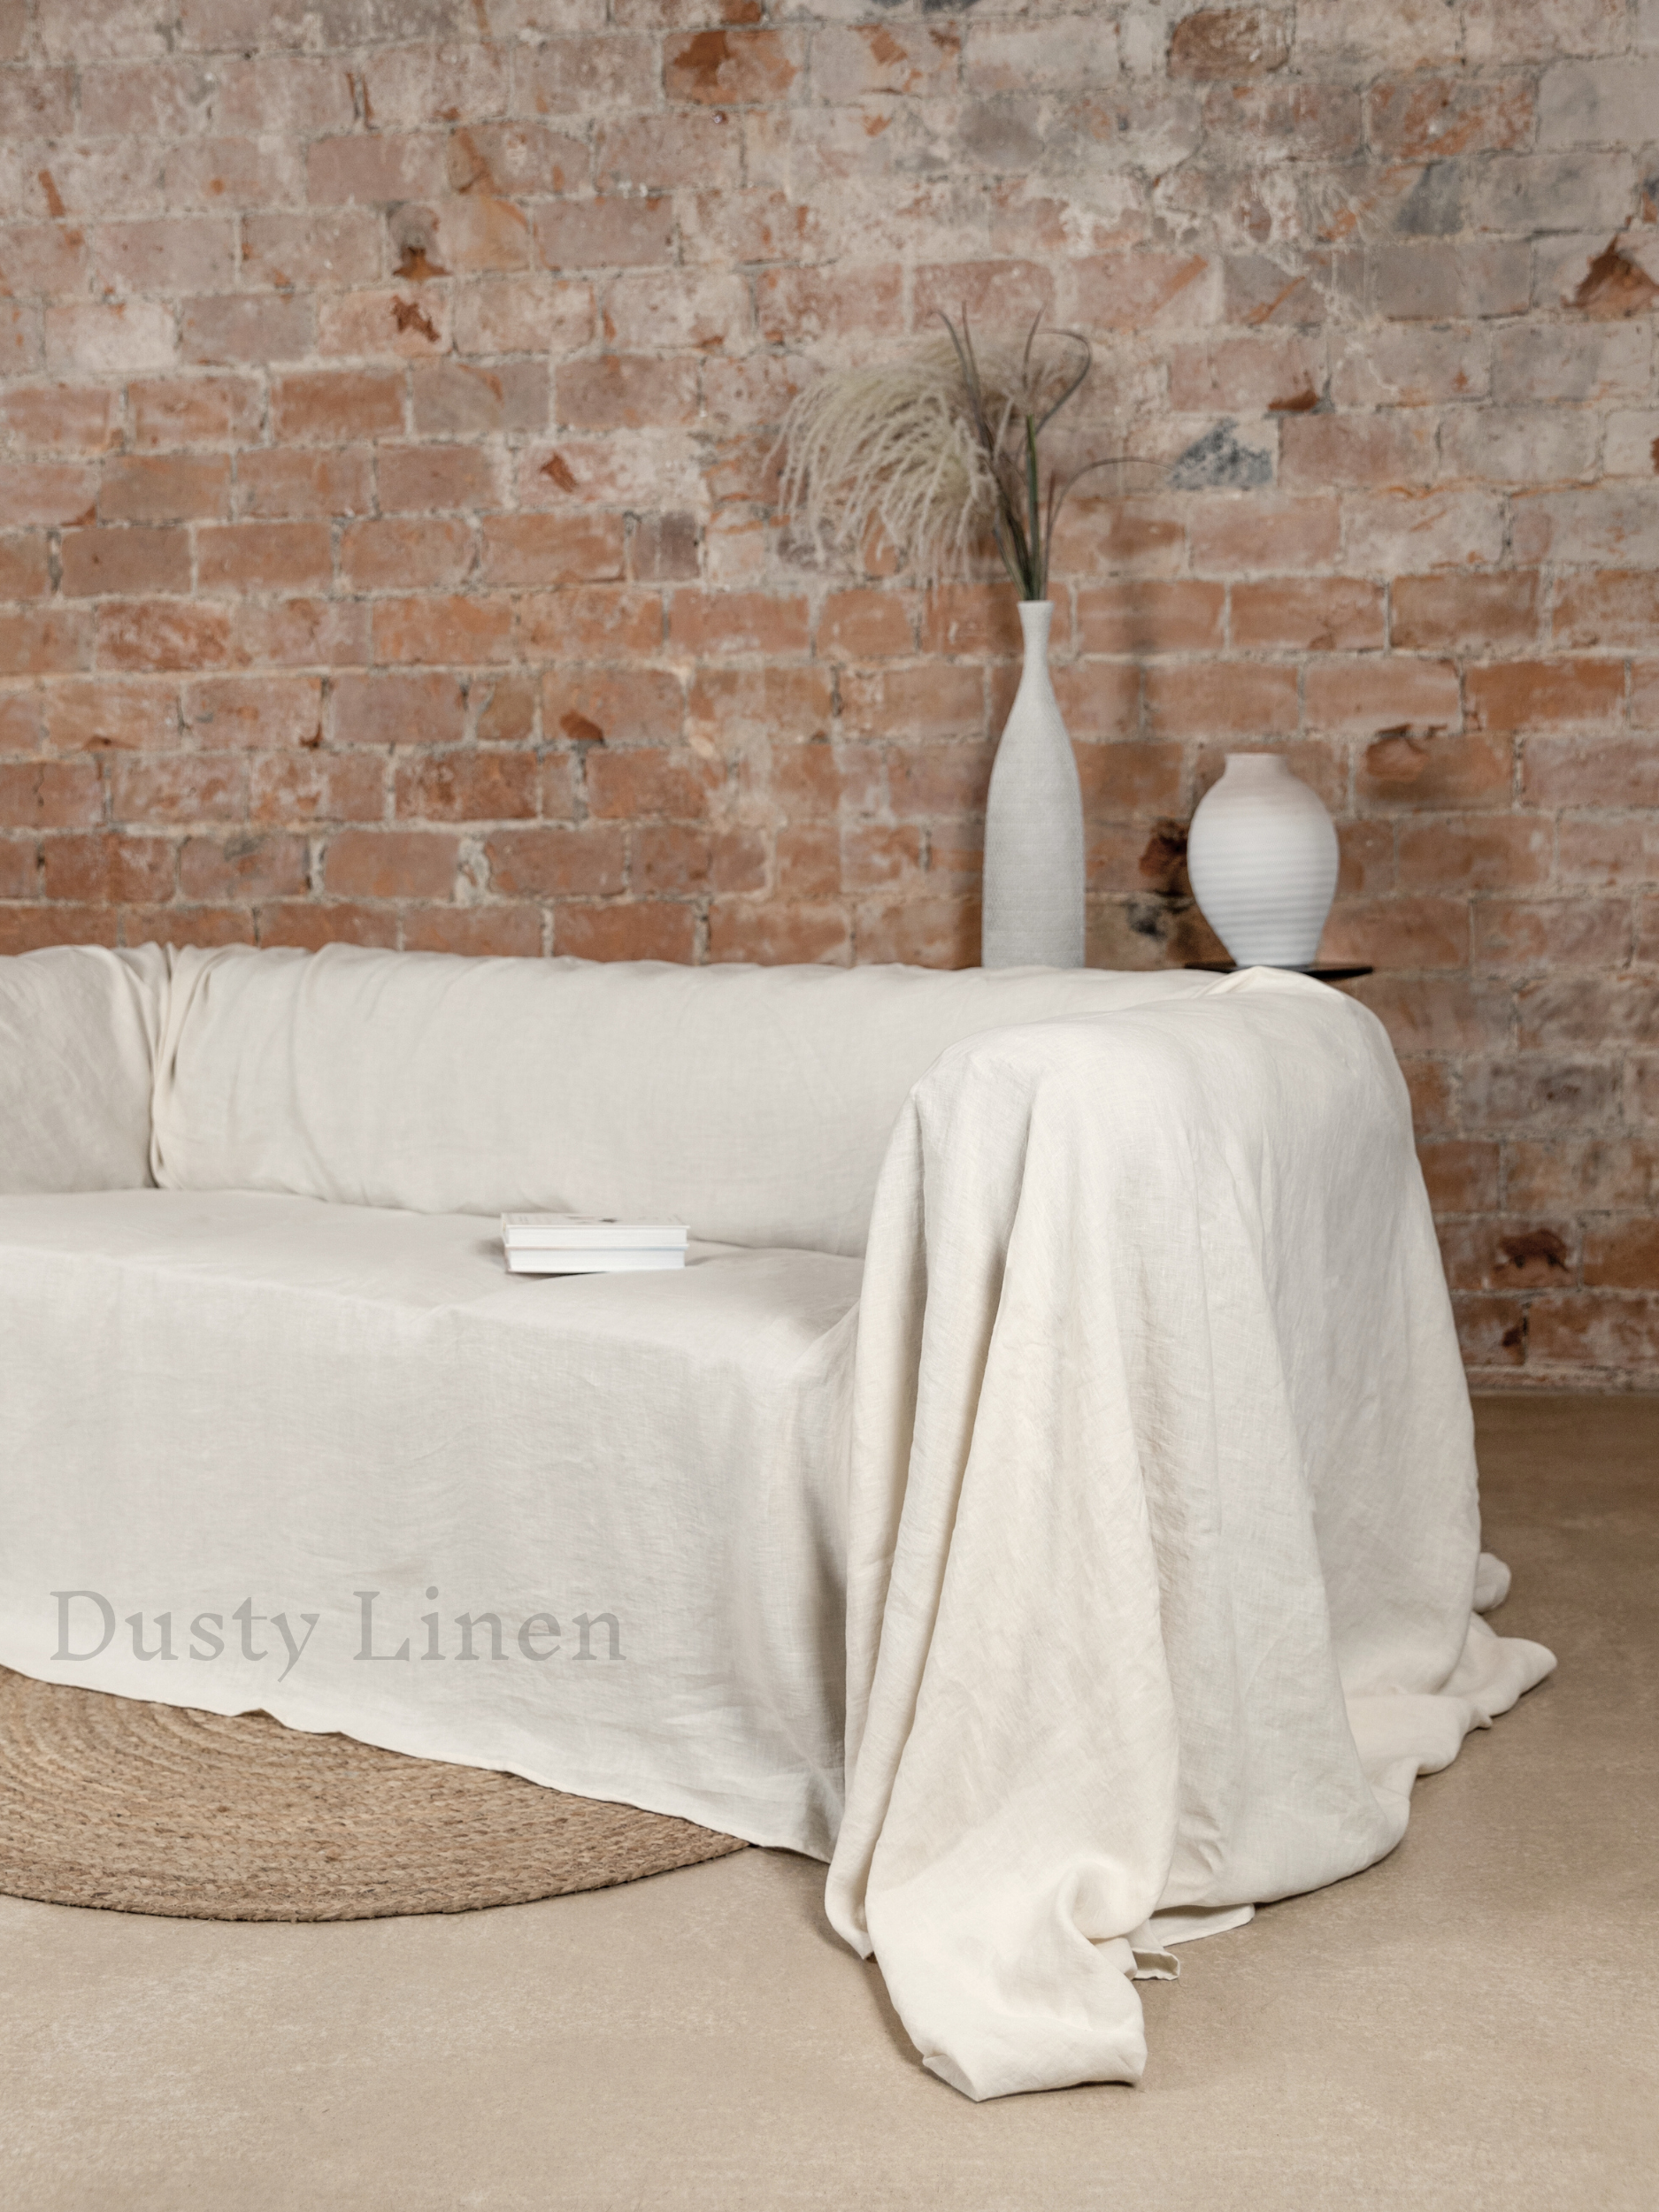 Seamless Linen Couch Cover - Cream color. Dusty linen